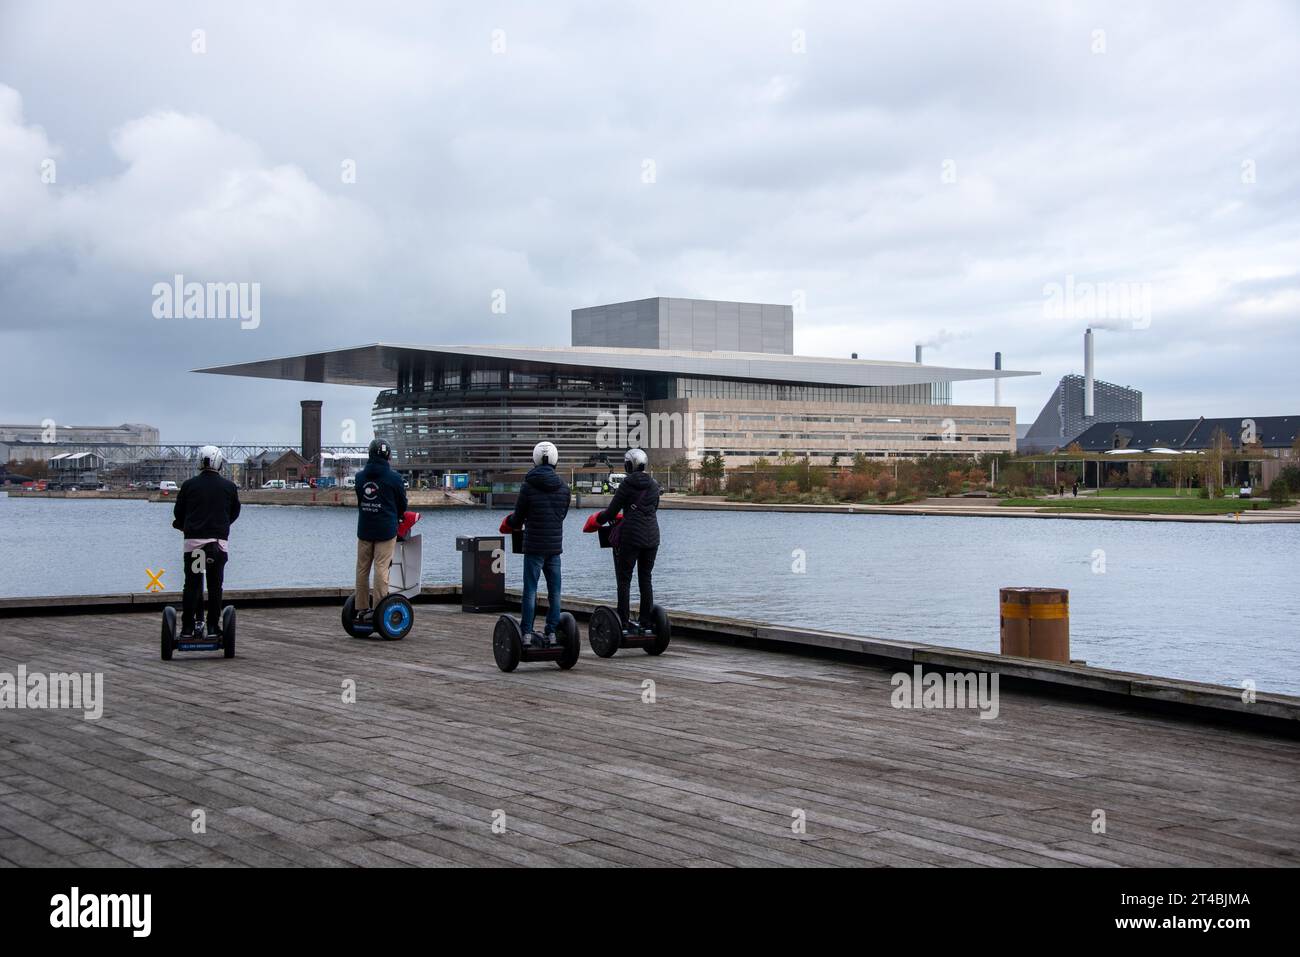 Royal Opera House, also called Operaen, in front of it tourists on Segway, Copenhagen, Denmark Stock Photo